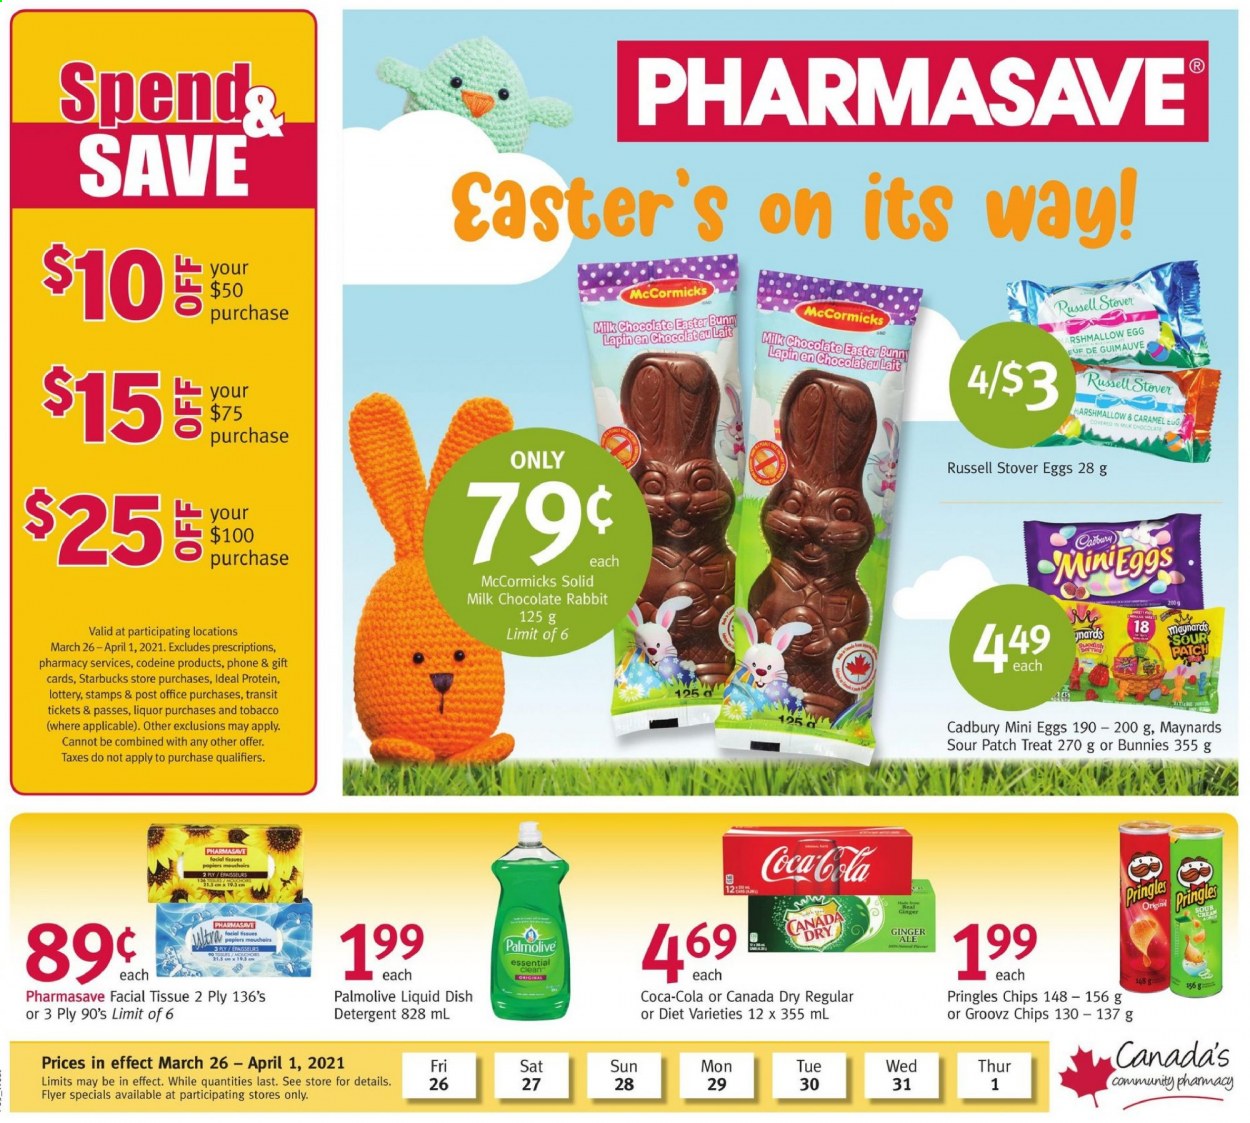 thumbnail - Pharmasave Flyer - March 26, 2021 - April 01, 2021 - Sales products - sour cream, milk chocolate, rabbit, chocolate, Cadbury, Sour Patch, chocolate rabbit, Pringles, caramel, Canada Dry, Coca-Cola, ginger ale, Starbucks, liquor, tissues, Palmolive, facial tissues, chips. Page 1.